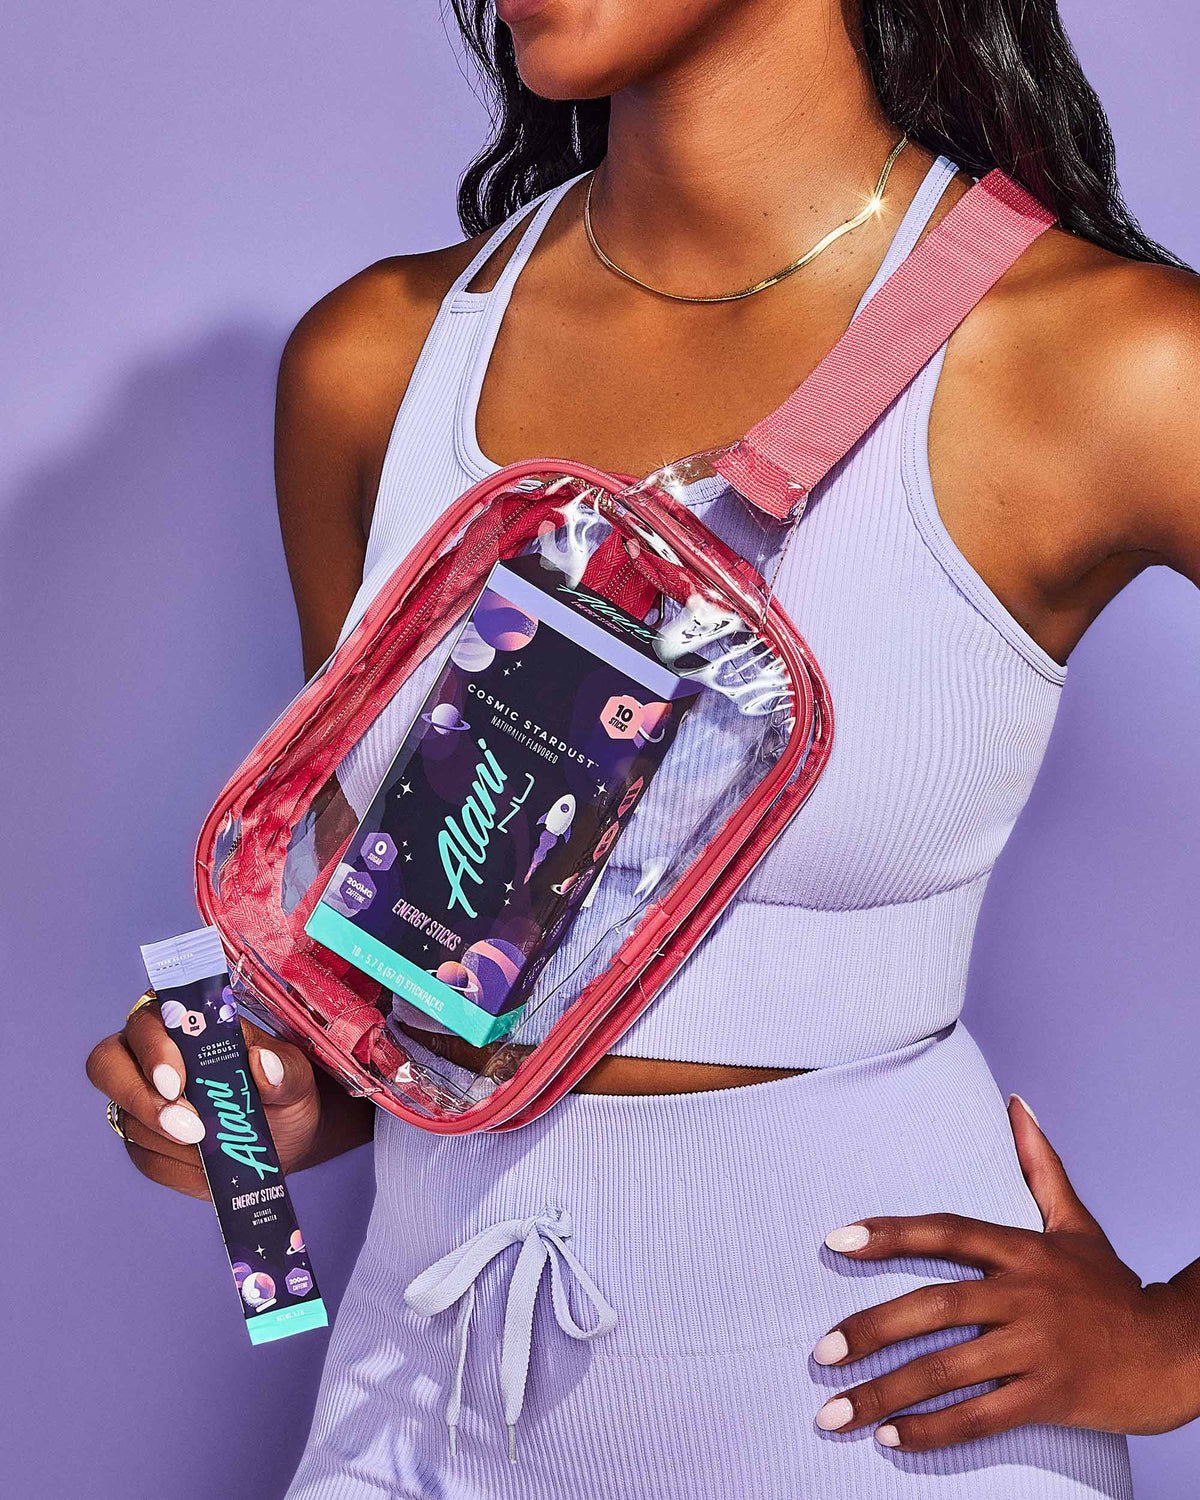 A woman in a purple top holding a clear bag of Energy Sticks in Cosmic Stardust flavor.